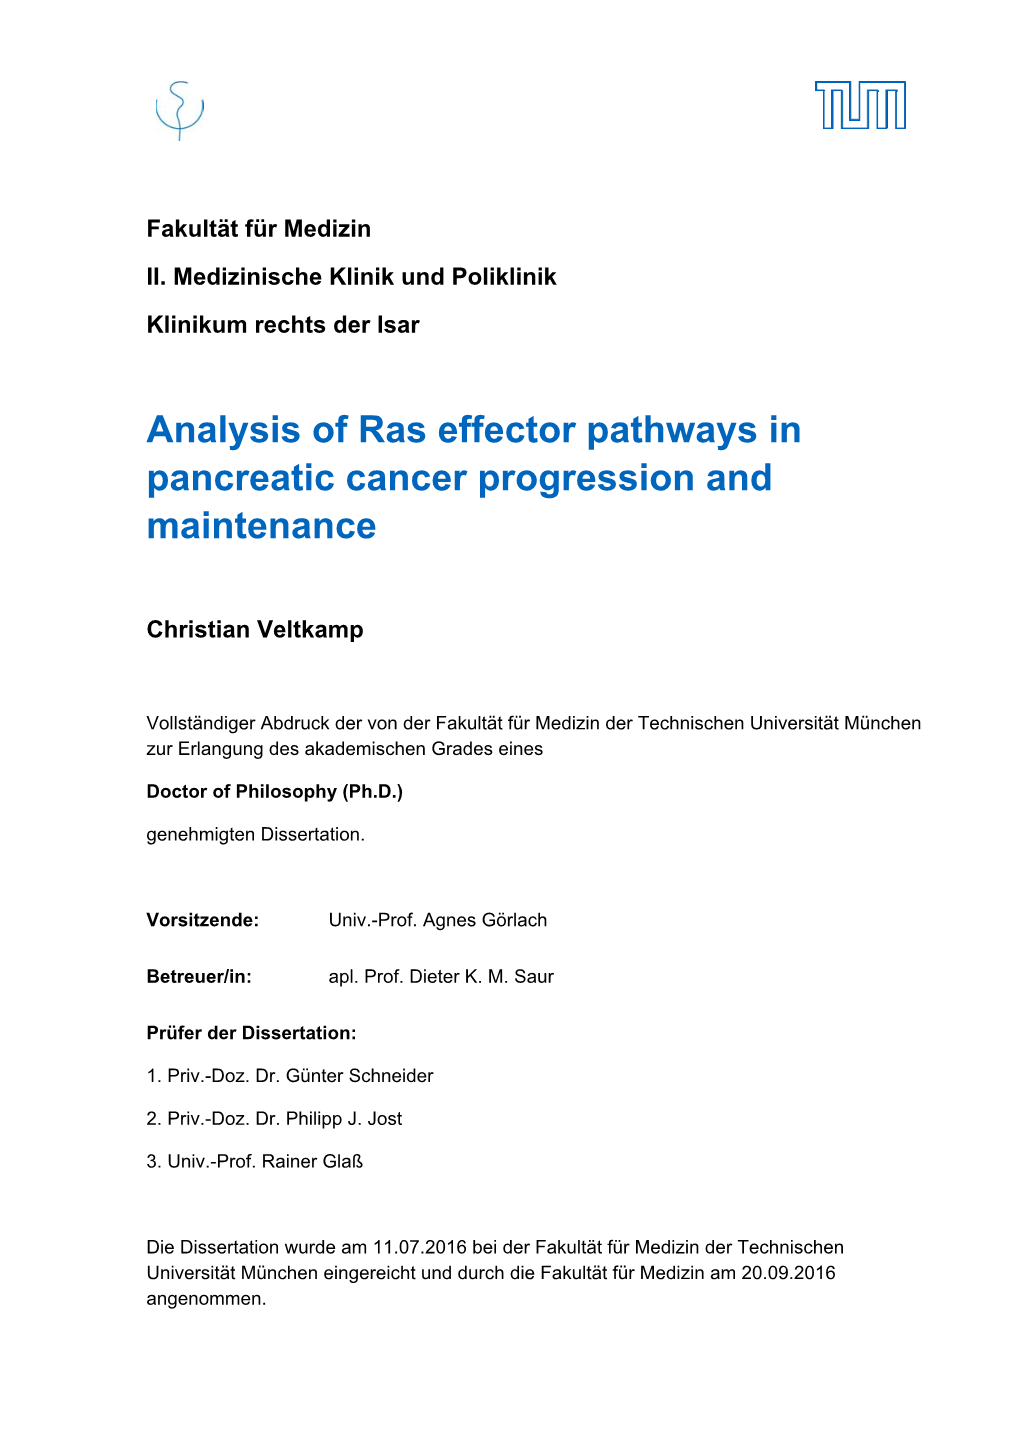 Analysis of Ras Effector Pathways in Pancreatic Cancer Progression and Maintenance